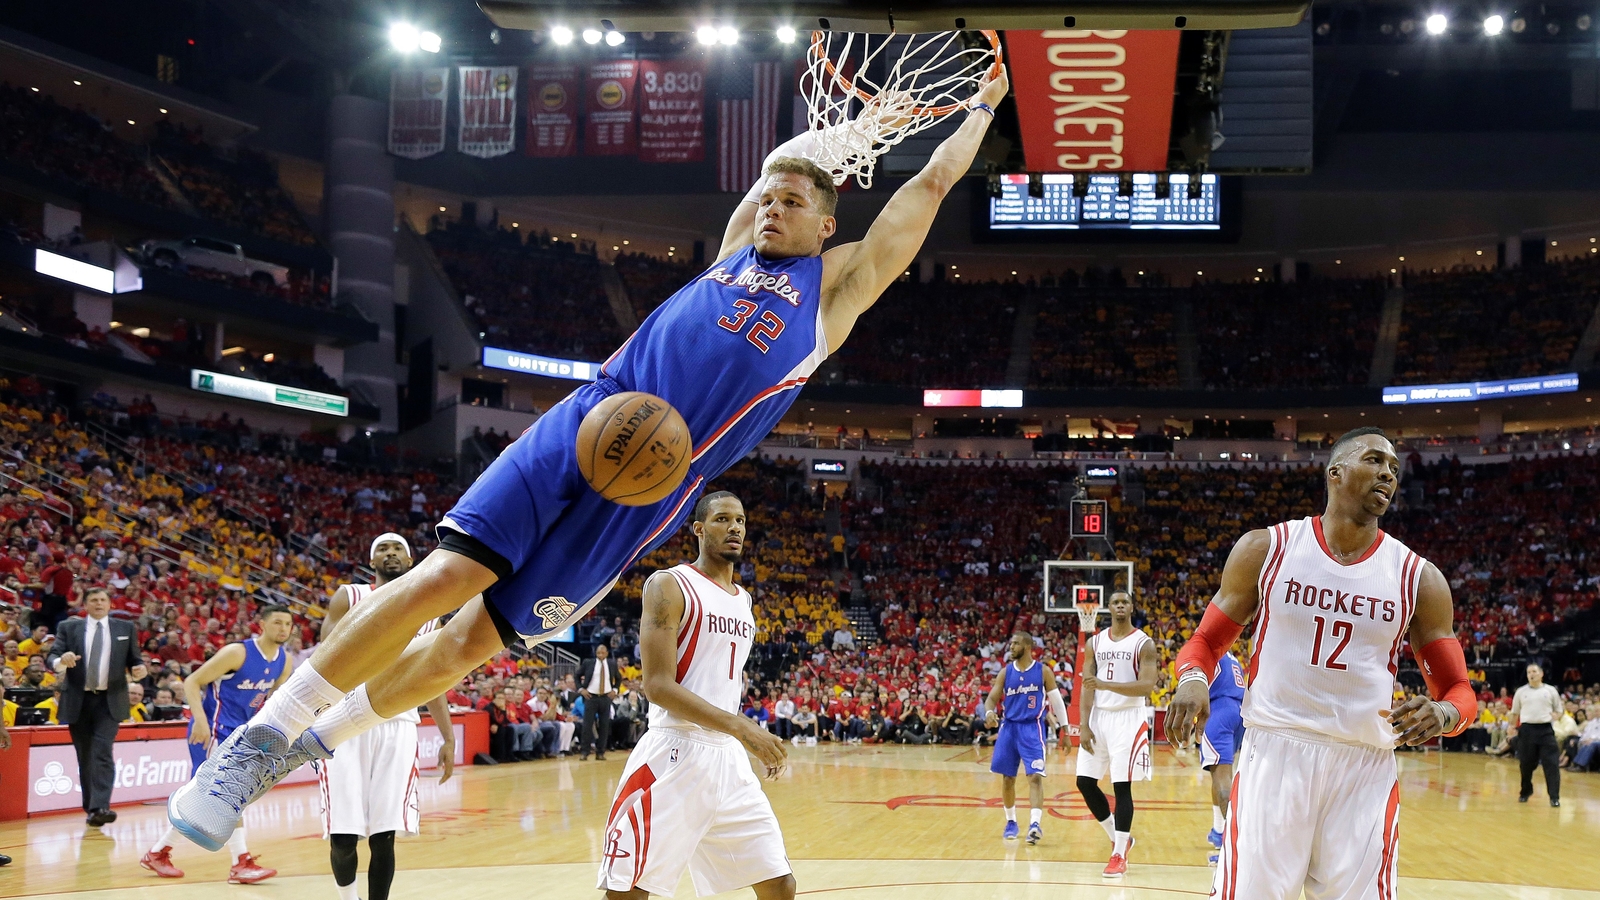 Blake Griffin retires after high-flying 14-year NBA career that included Rookie of the Year, All-Star honors [Video]